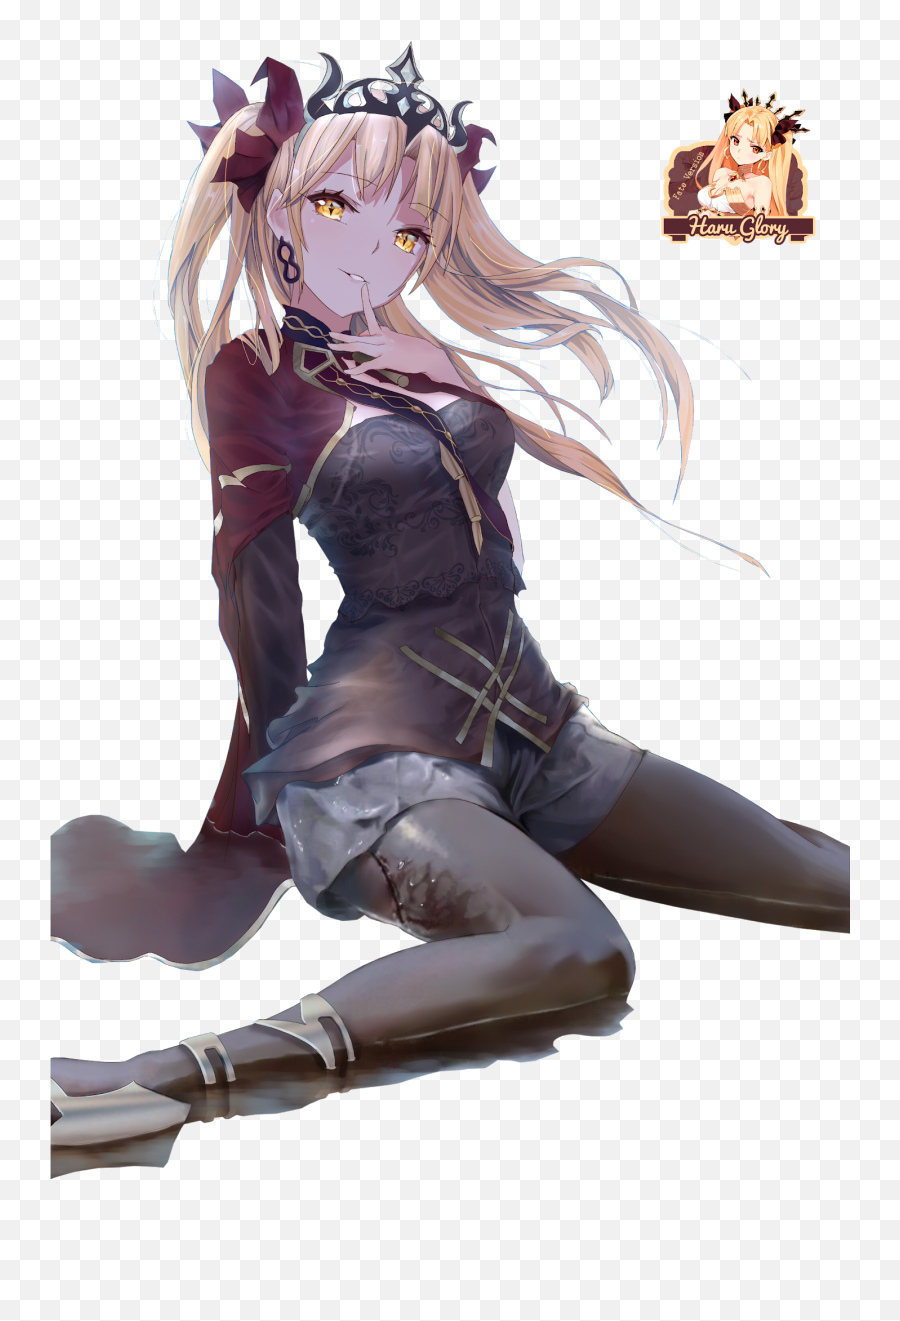 Download Ereshkigal Sexy Png Image With No Background - Fate Grand Order Ereshkigal Ecchi,Sexy Png